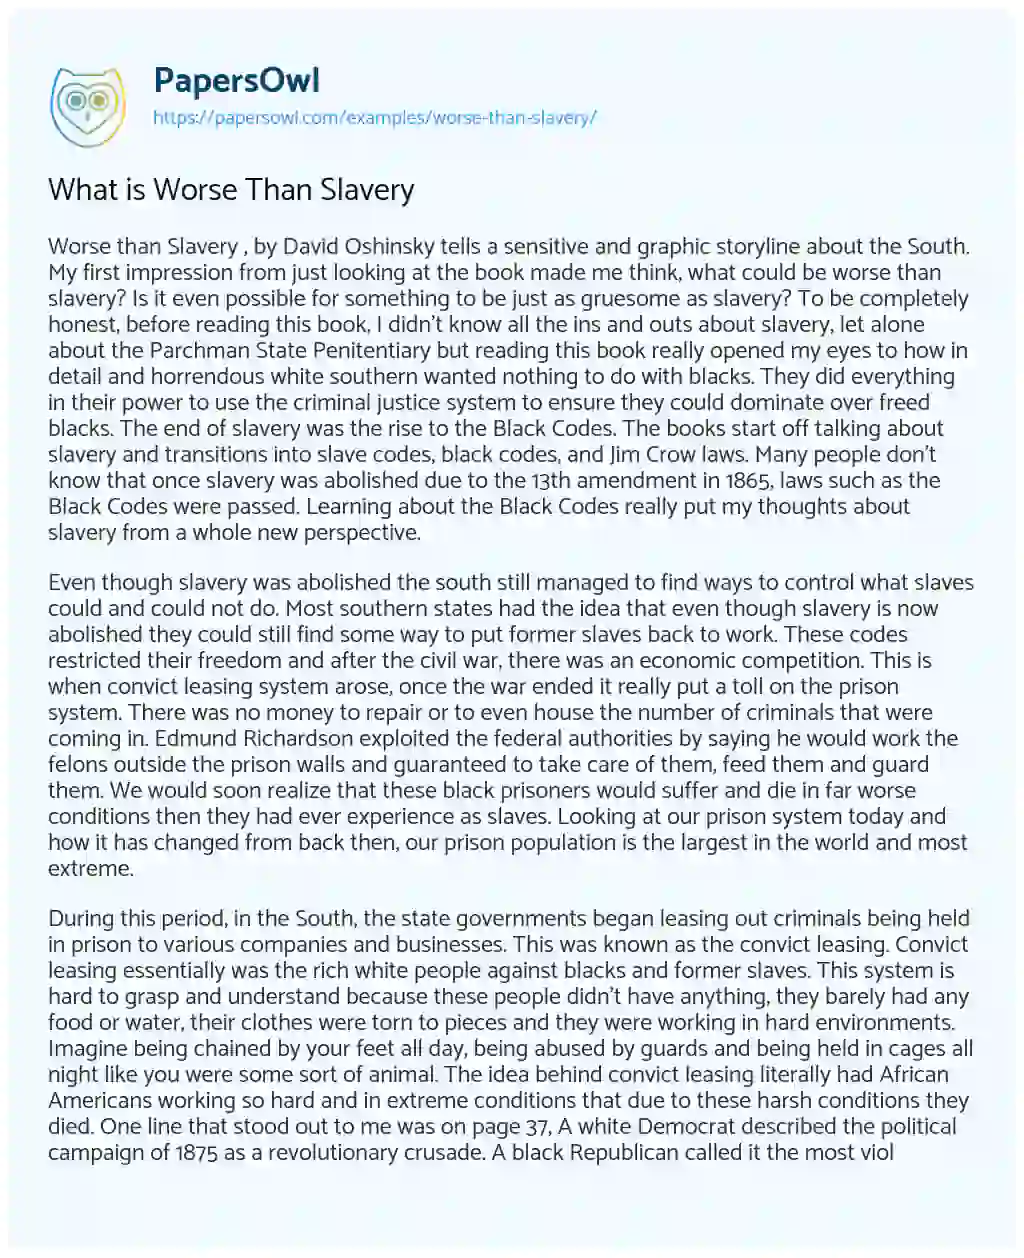 Essay on What is Worse than Slavery